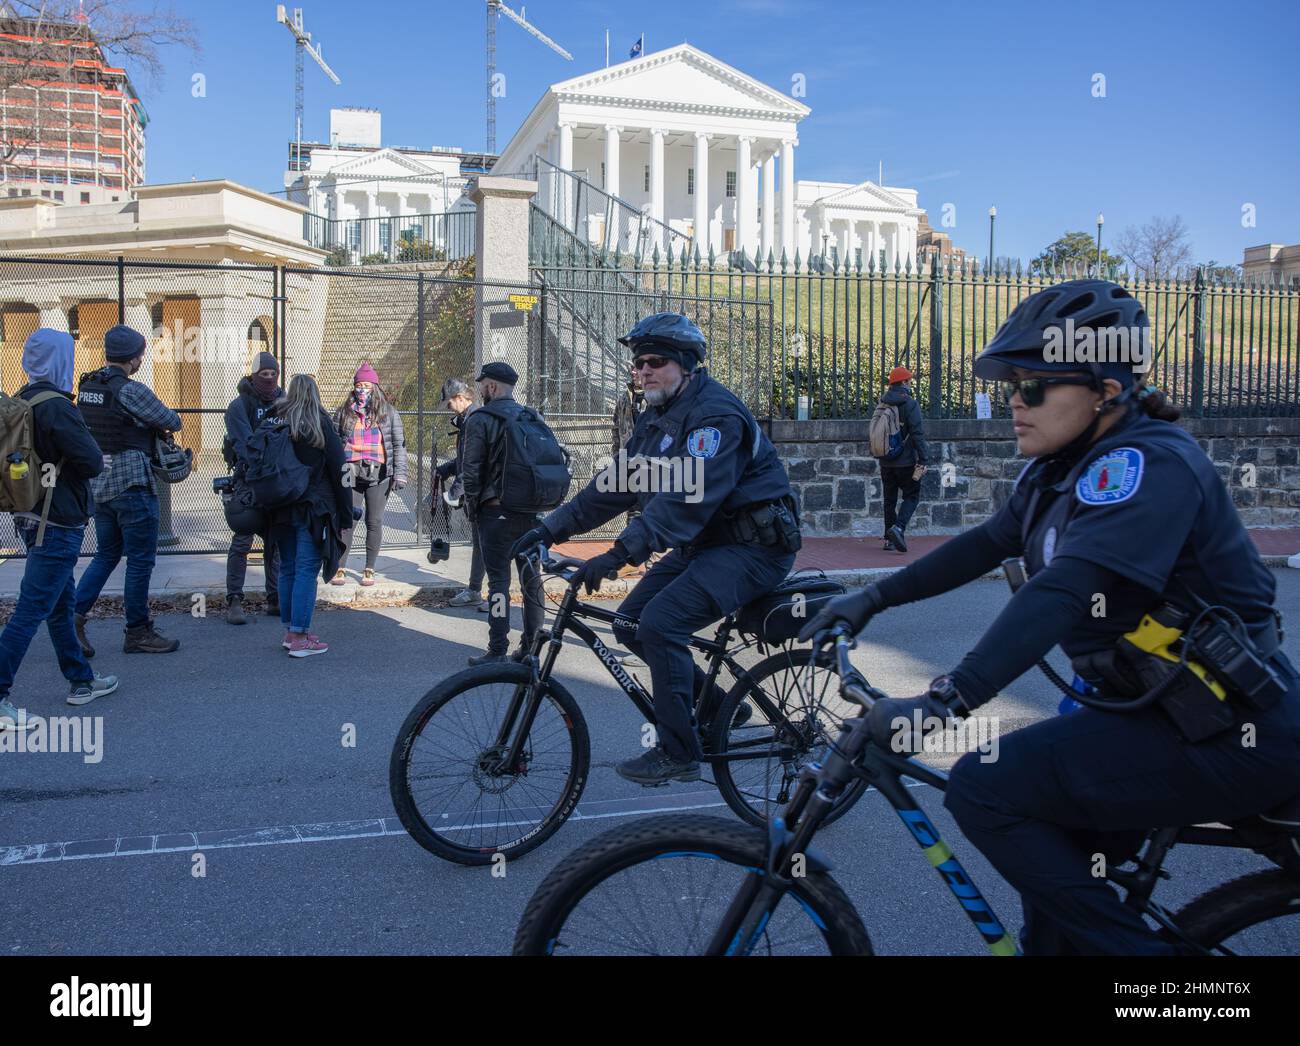 RICHMOND, VA – January 17, 2021: Police officers and others are seen near the Virginia State Capitol in Richmond. Stock Photo